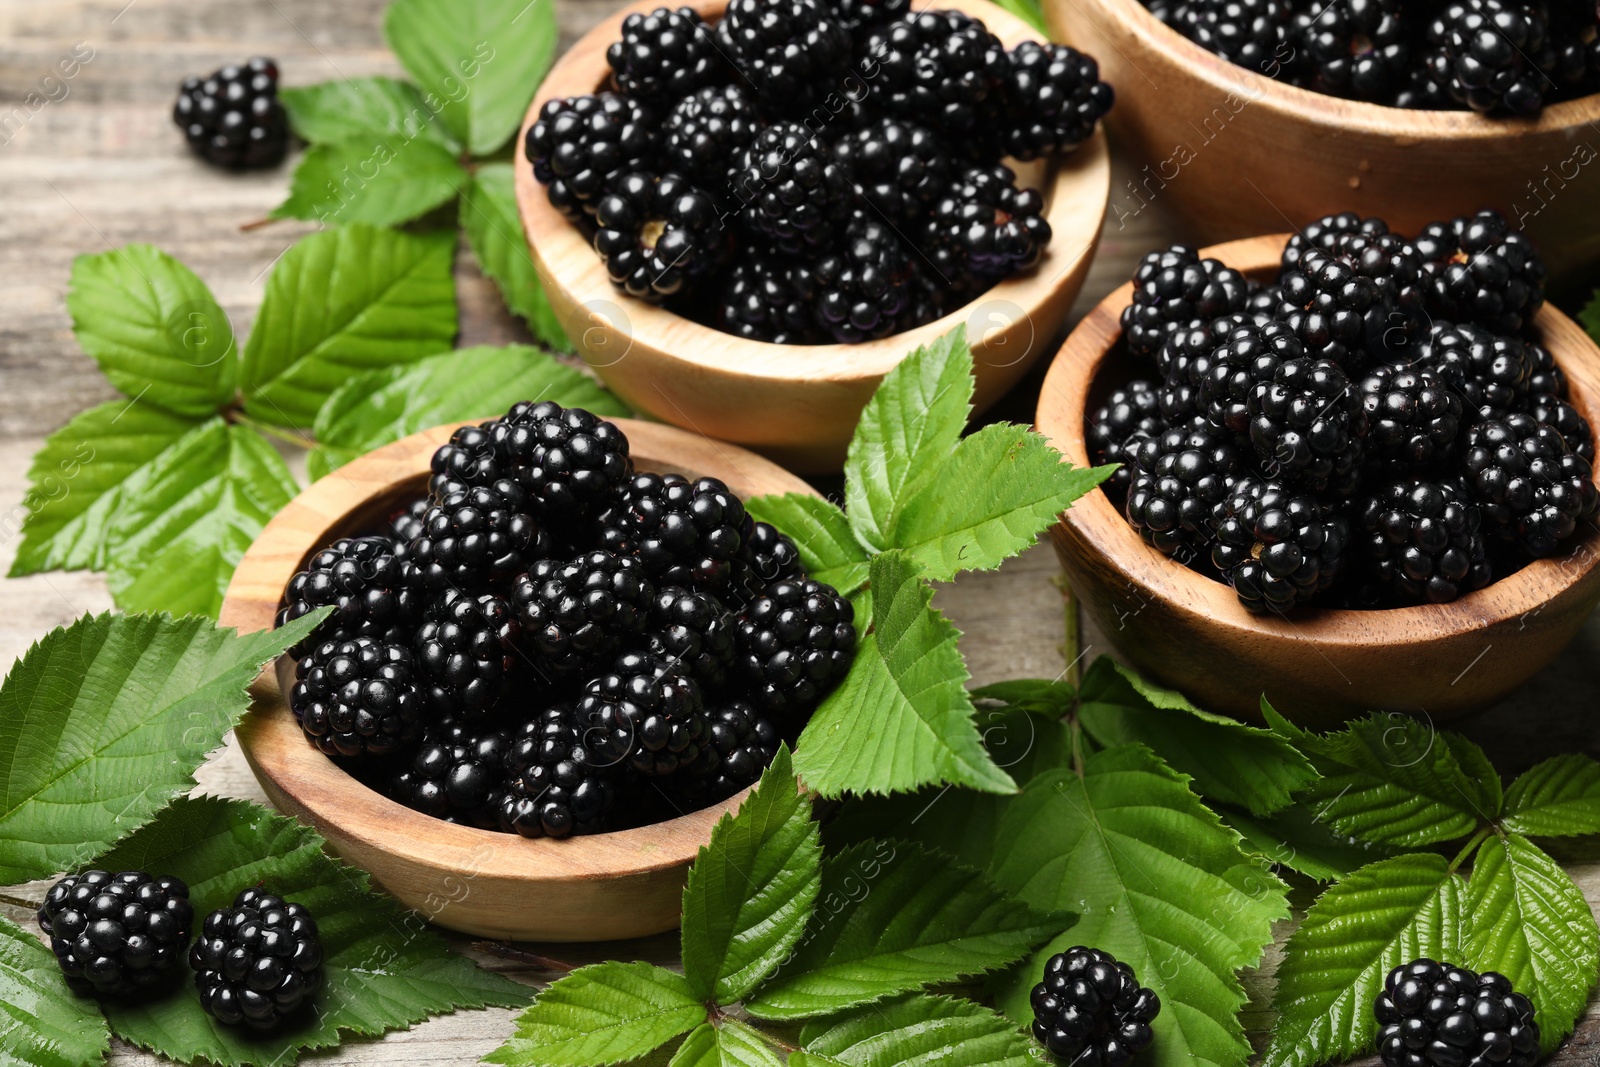 Photo of Ripe blackberries and green leaves on wooden table, closeup